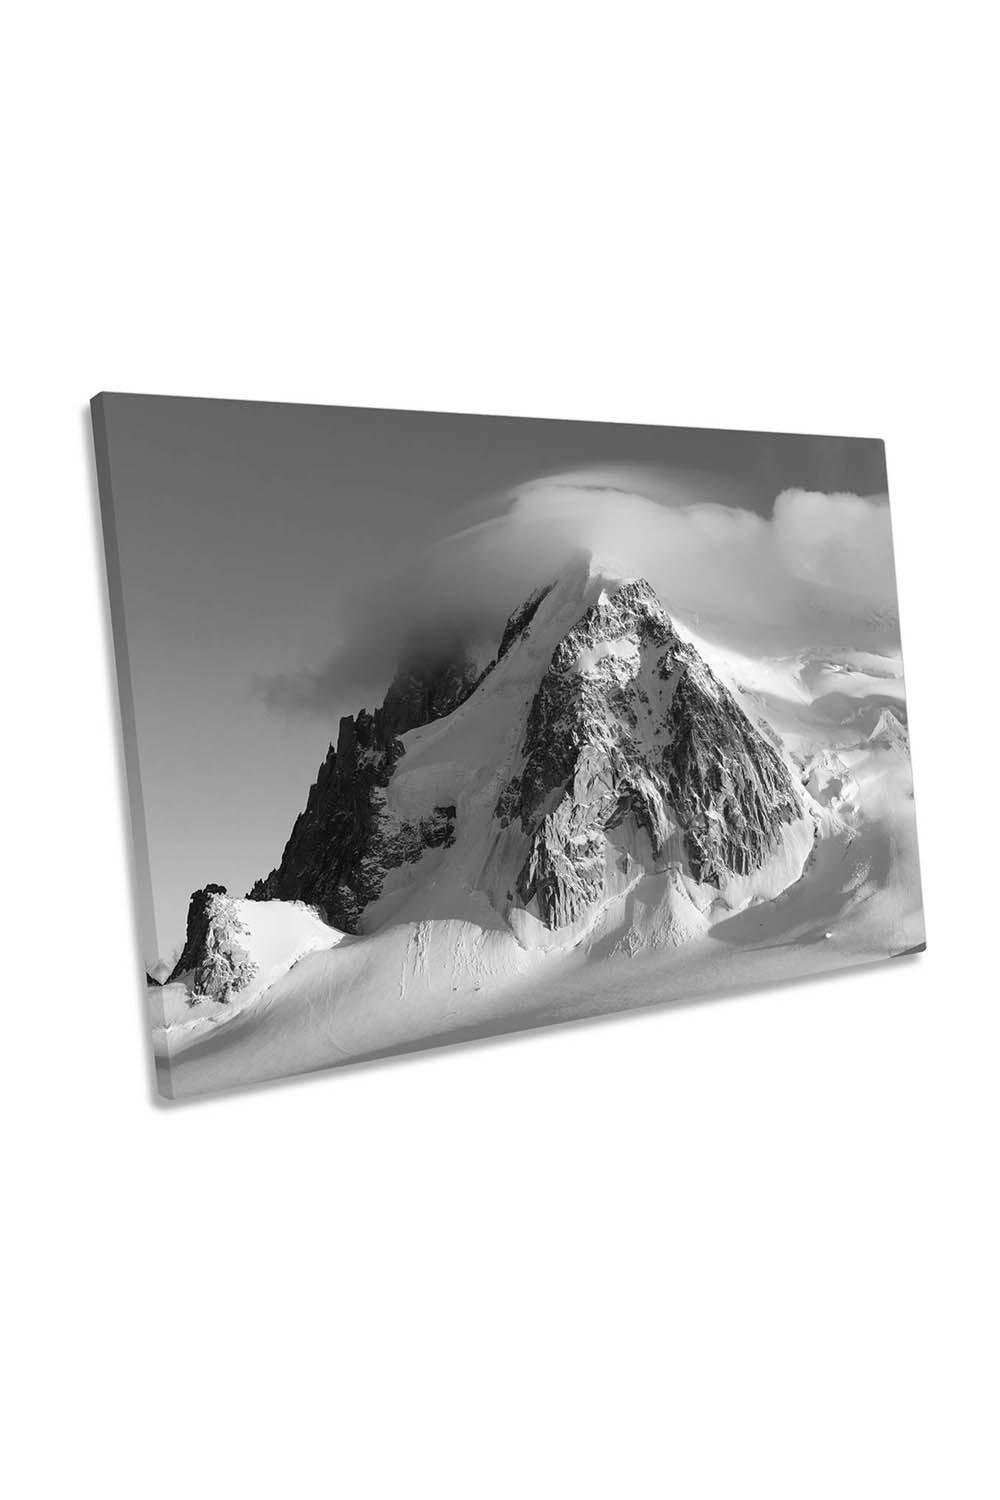 Misty Mountain Snow Black and White Canvas Wall Art Picture Print